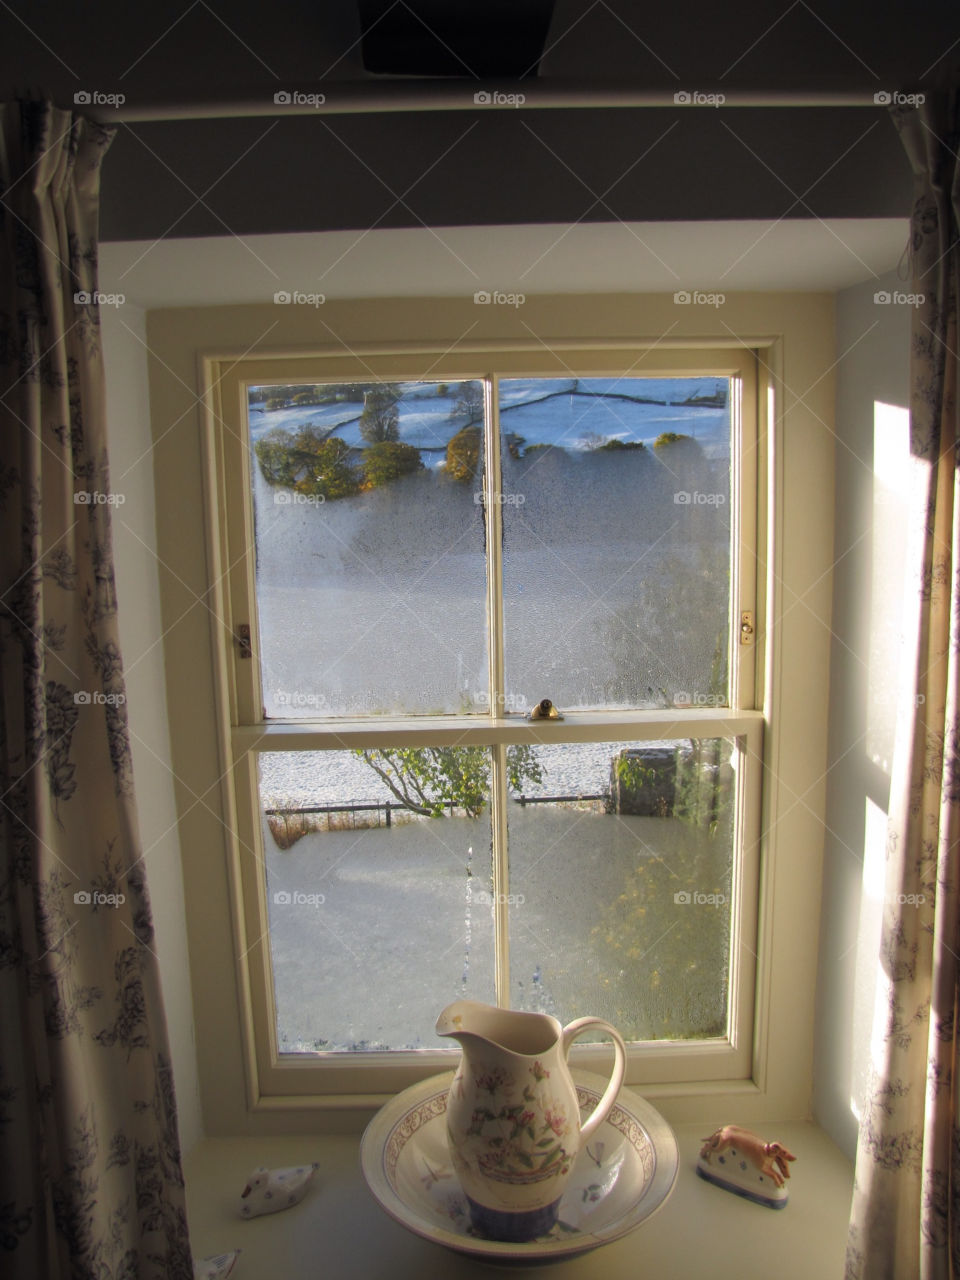 snow england window view by dramaqueenz